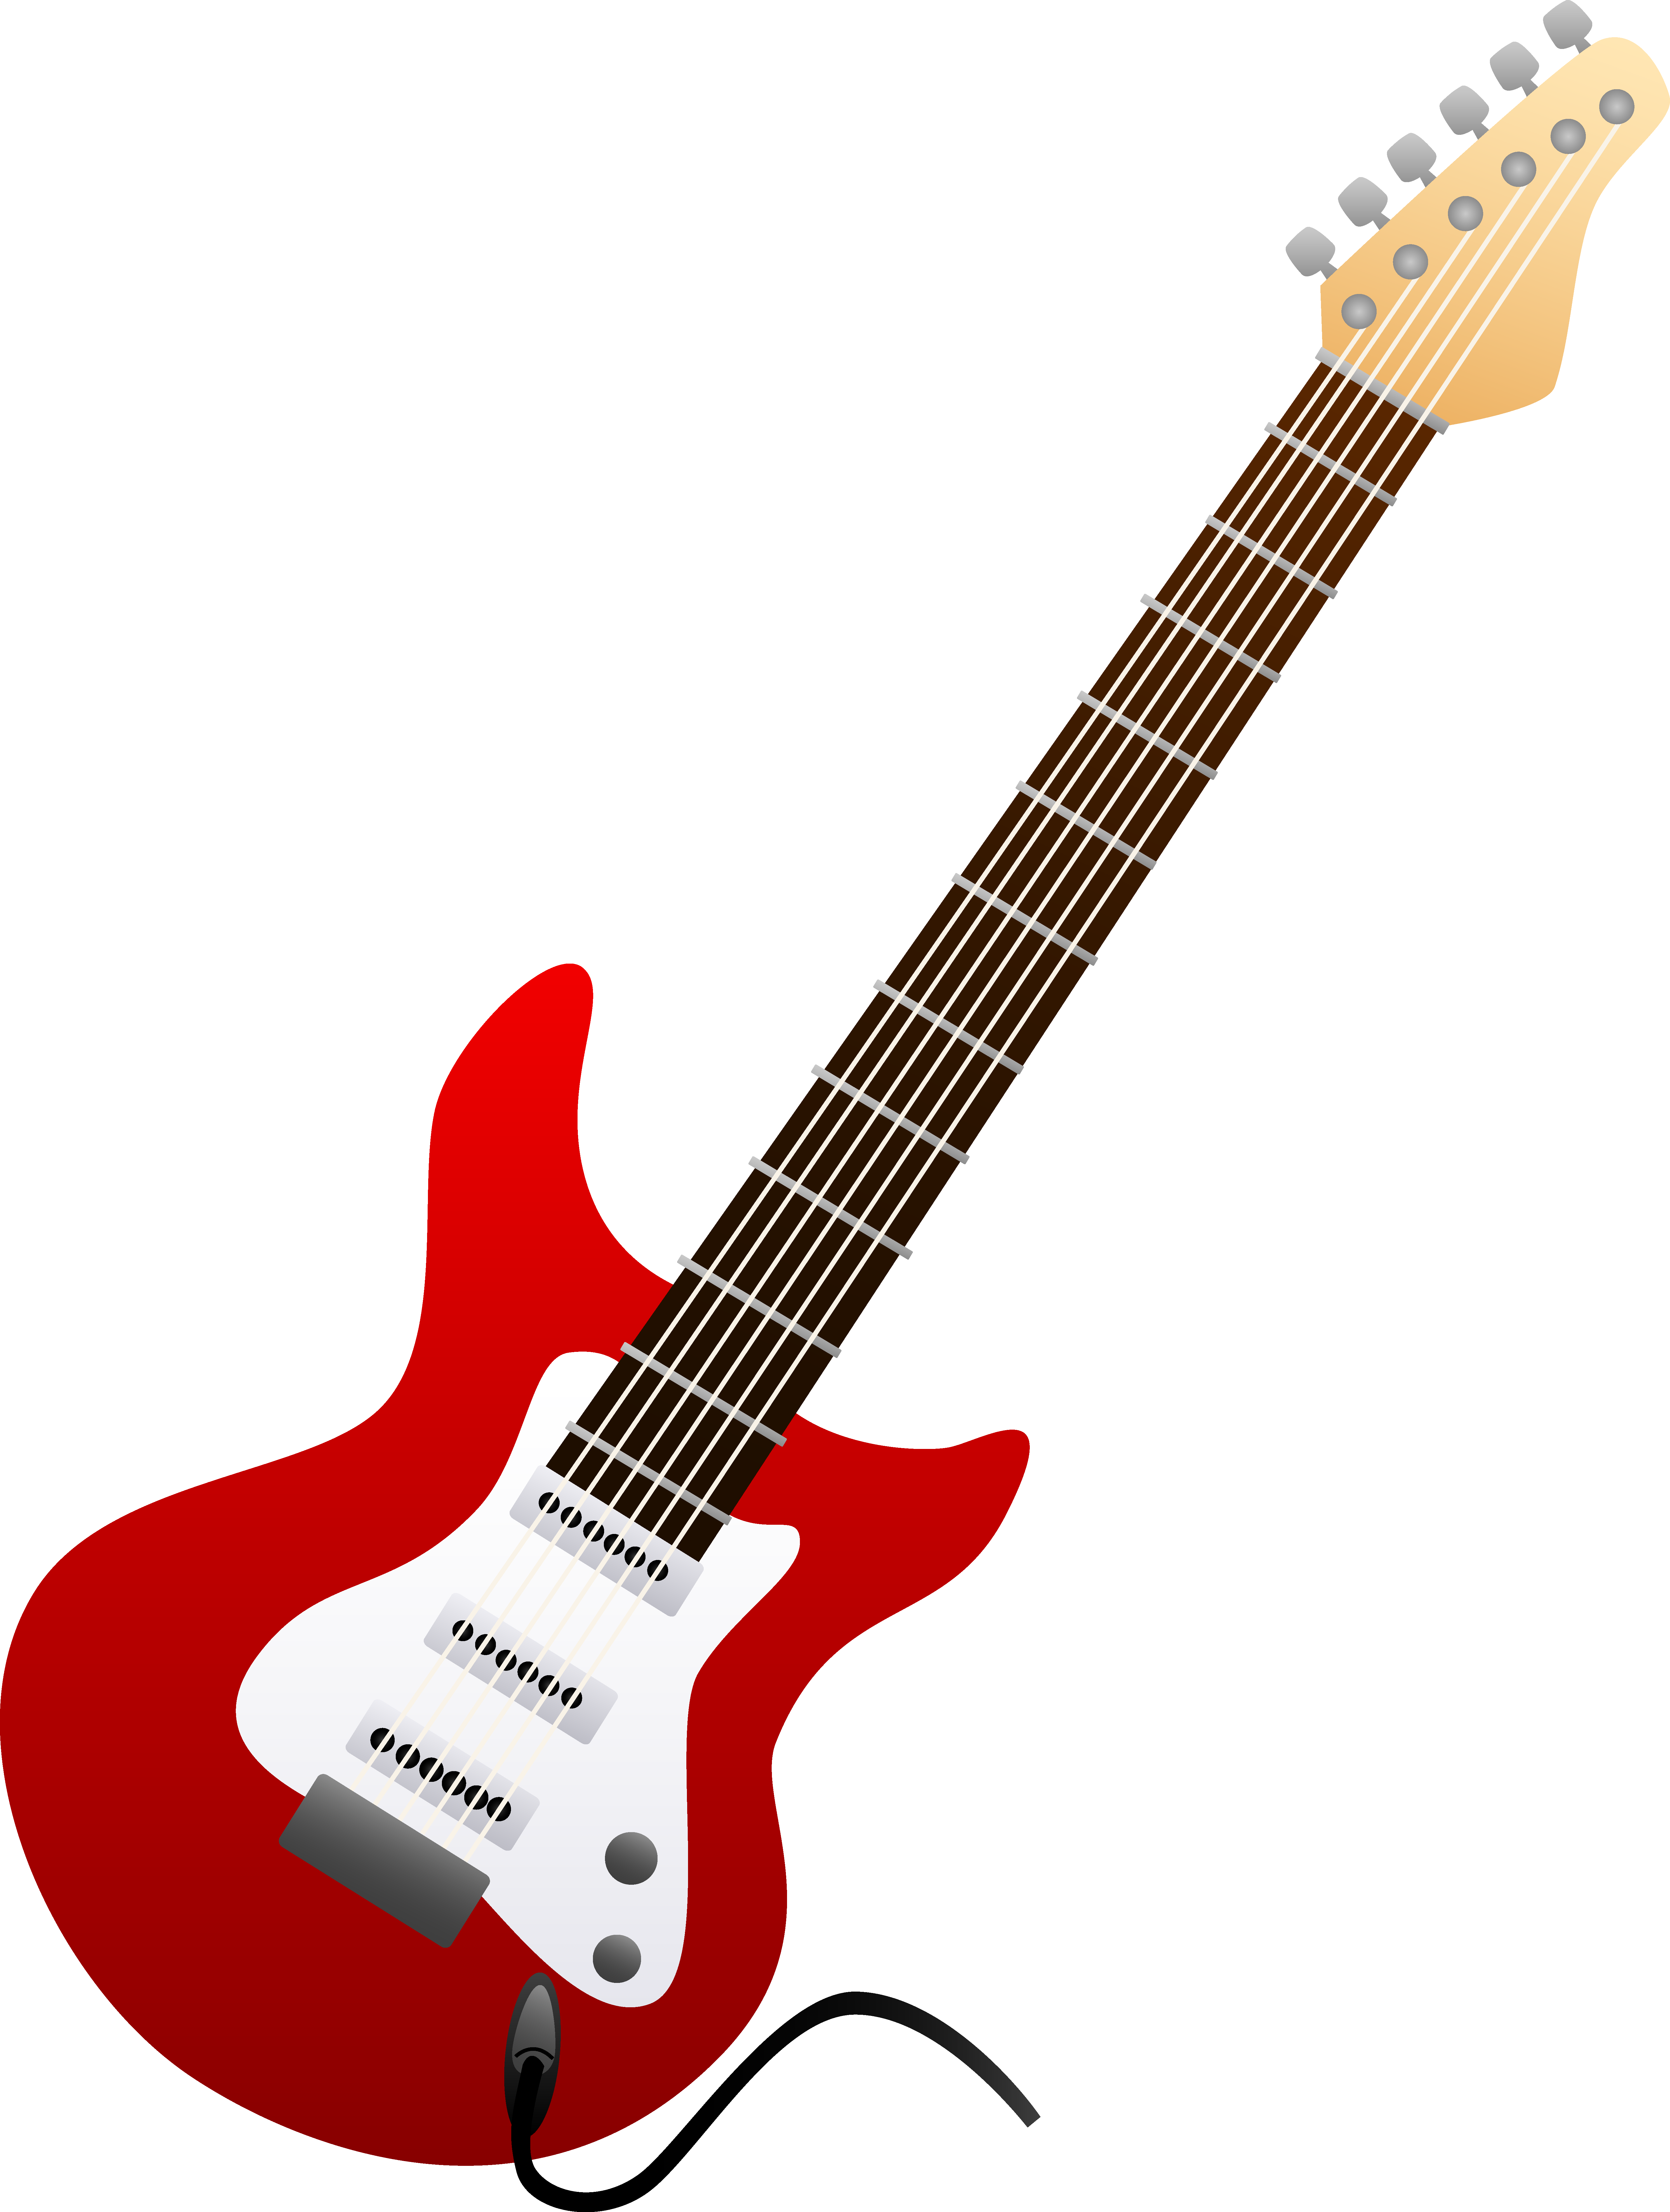 Guitar Outline Clipart Black And White - Free ...